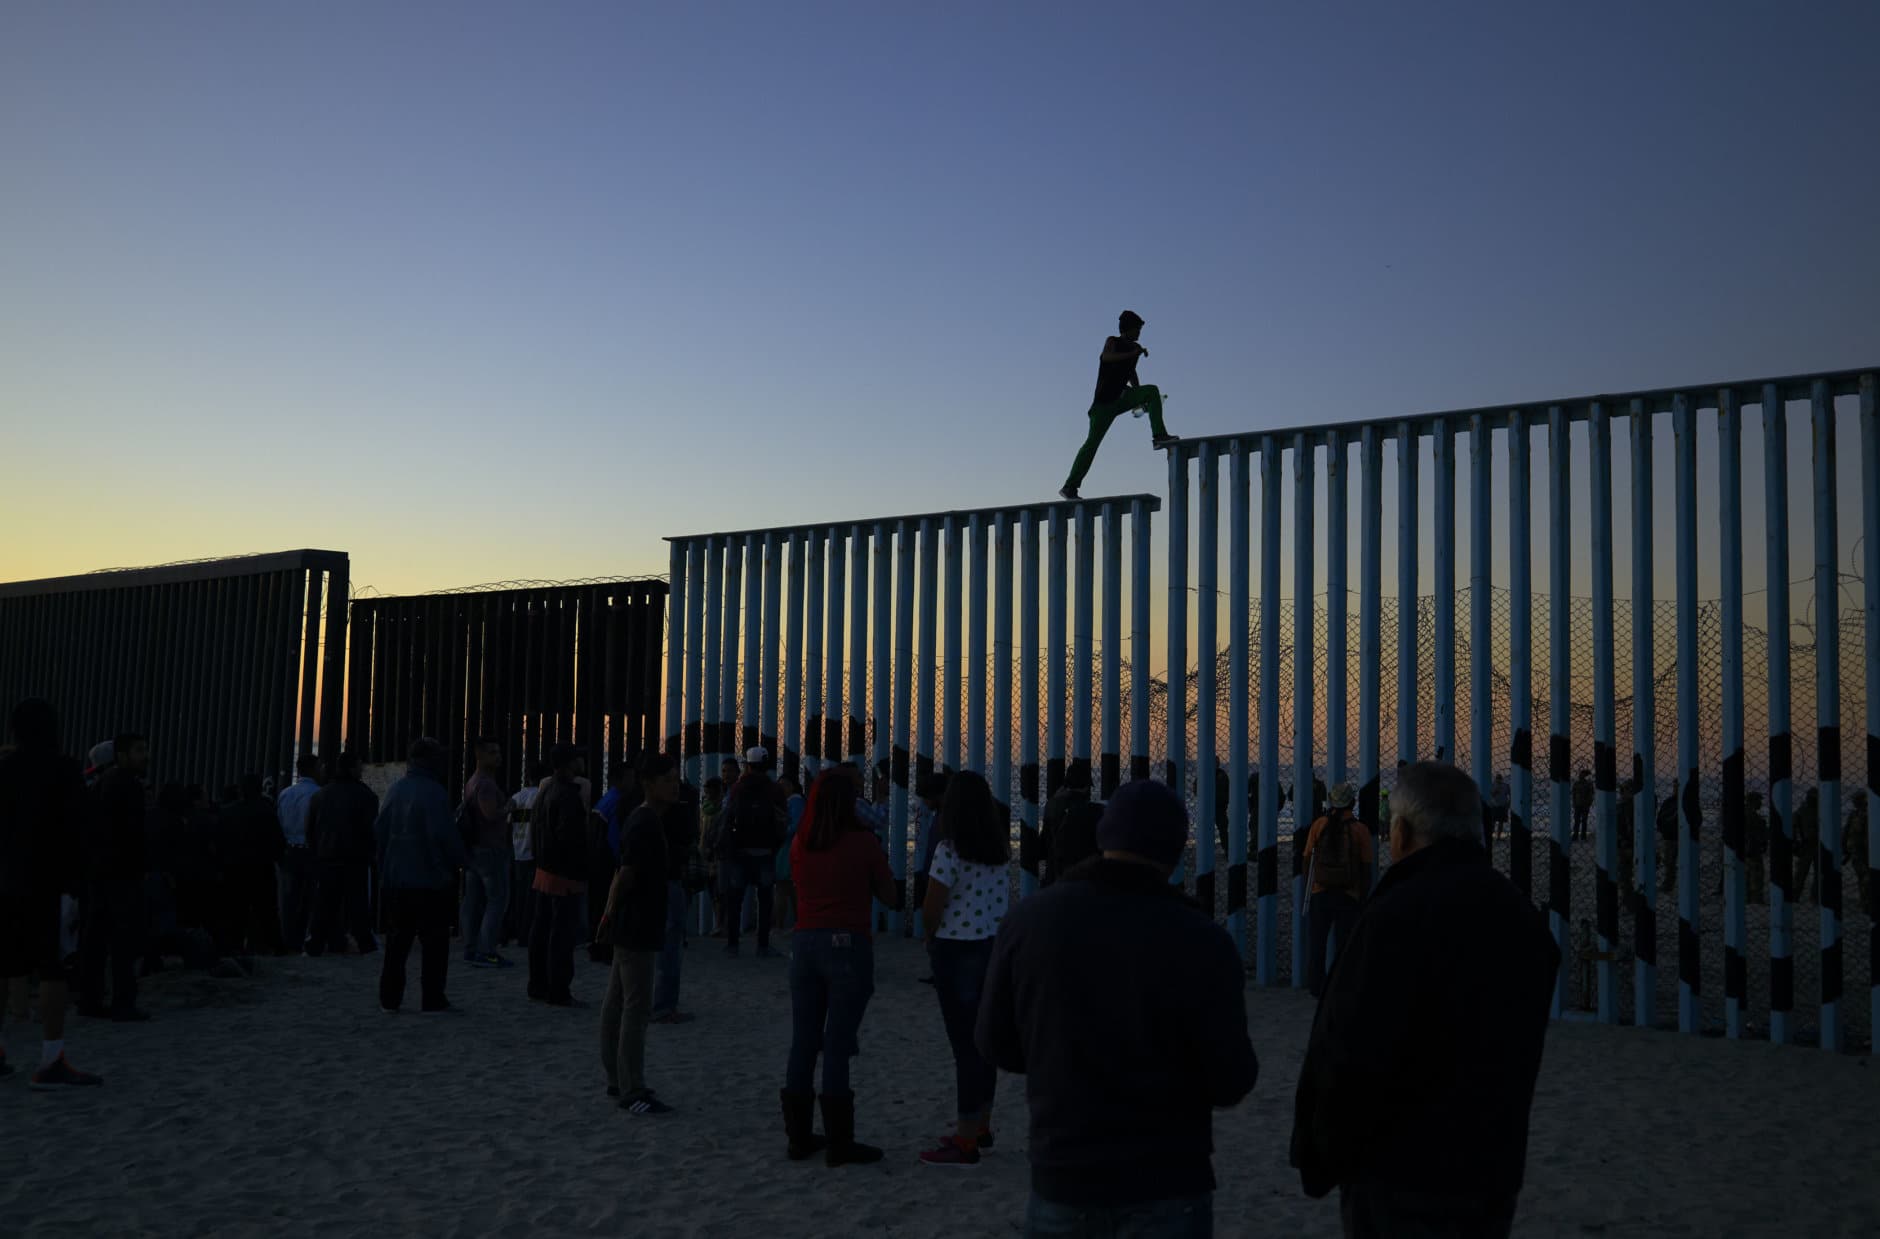 A man from Honduras walks along the top of the border structure separating Mexico and the United States on Nov. 14, 2018, in Tijuana, Mexico. (AP Photo/Gregory Bull)